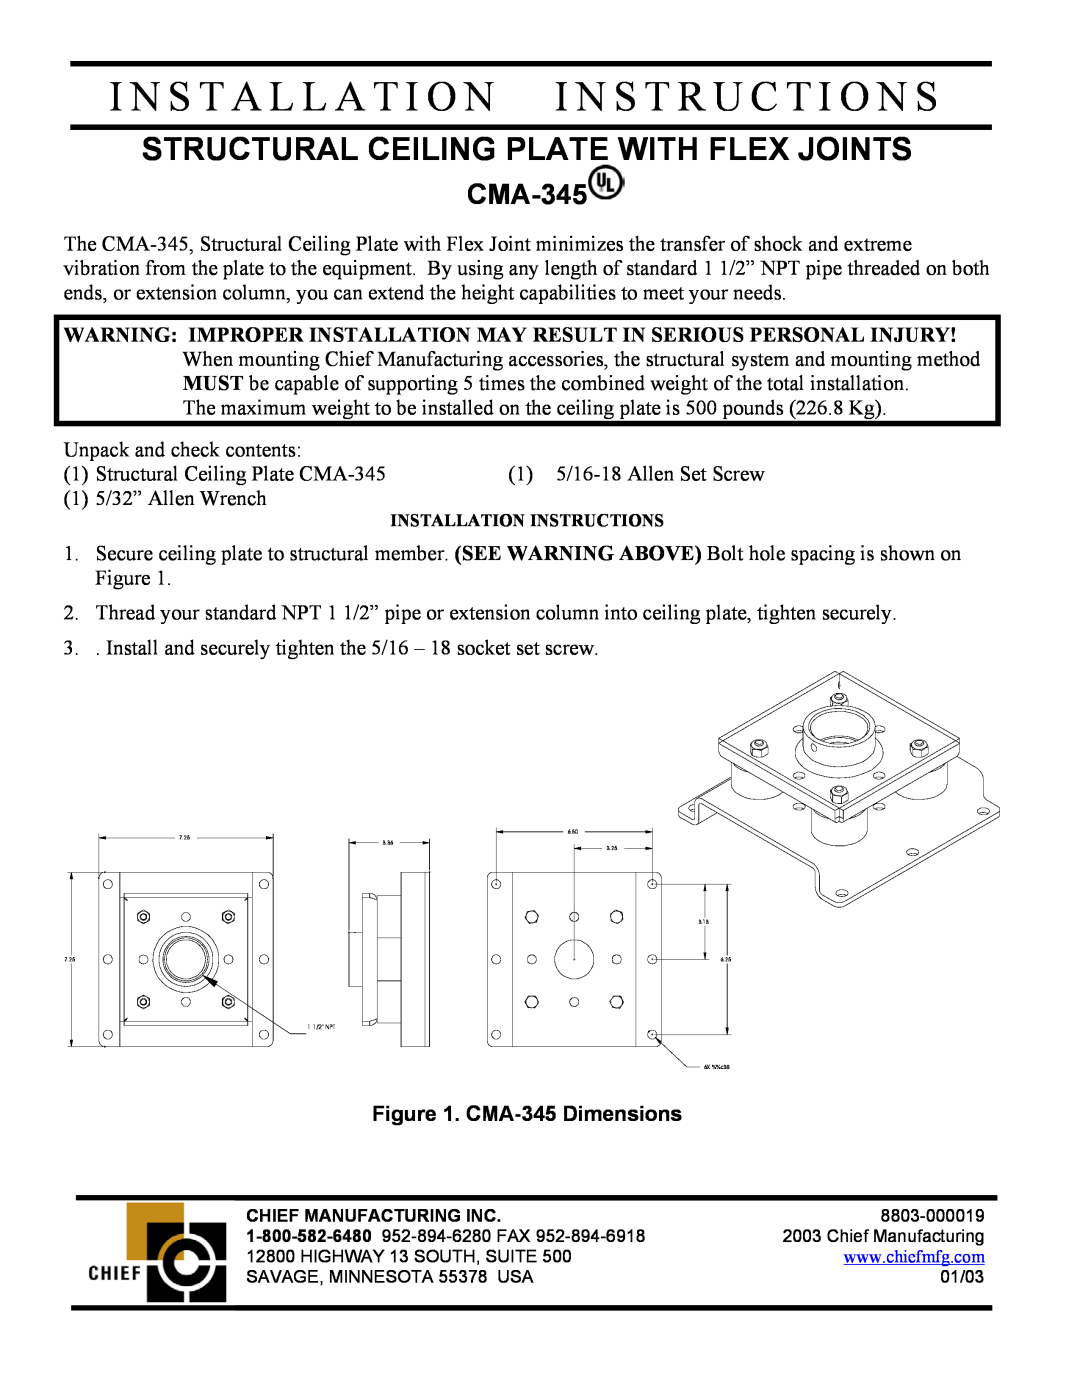 Chief Manufacturing installation instructions I N S T A L L A T I O N I N S T R U C T I O N S, CMA-345Dimensions 